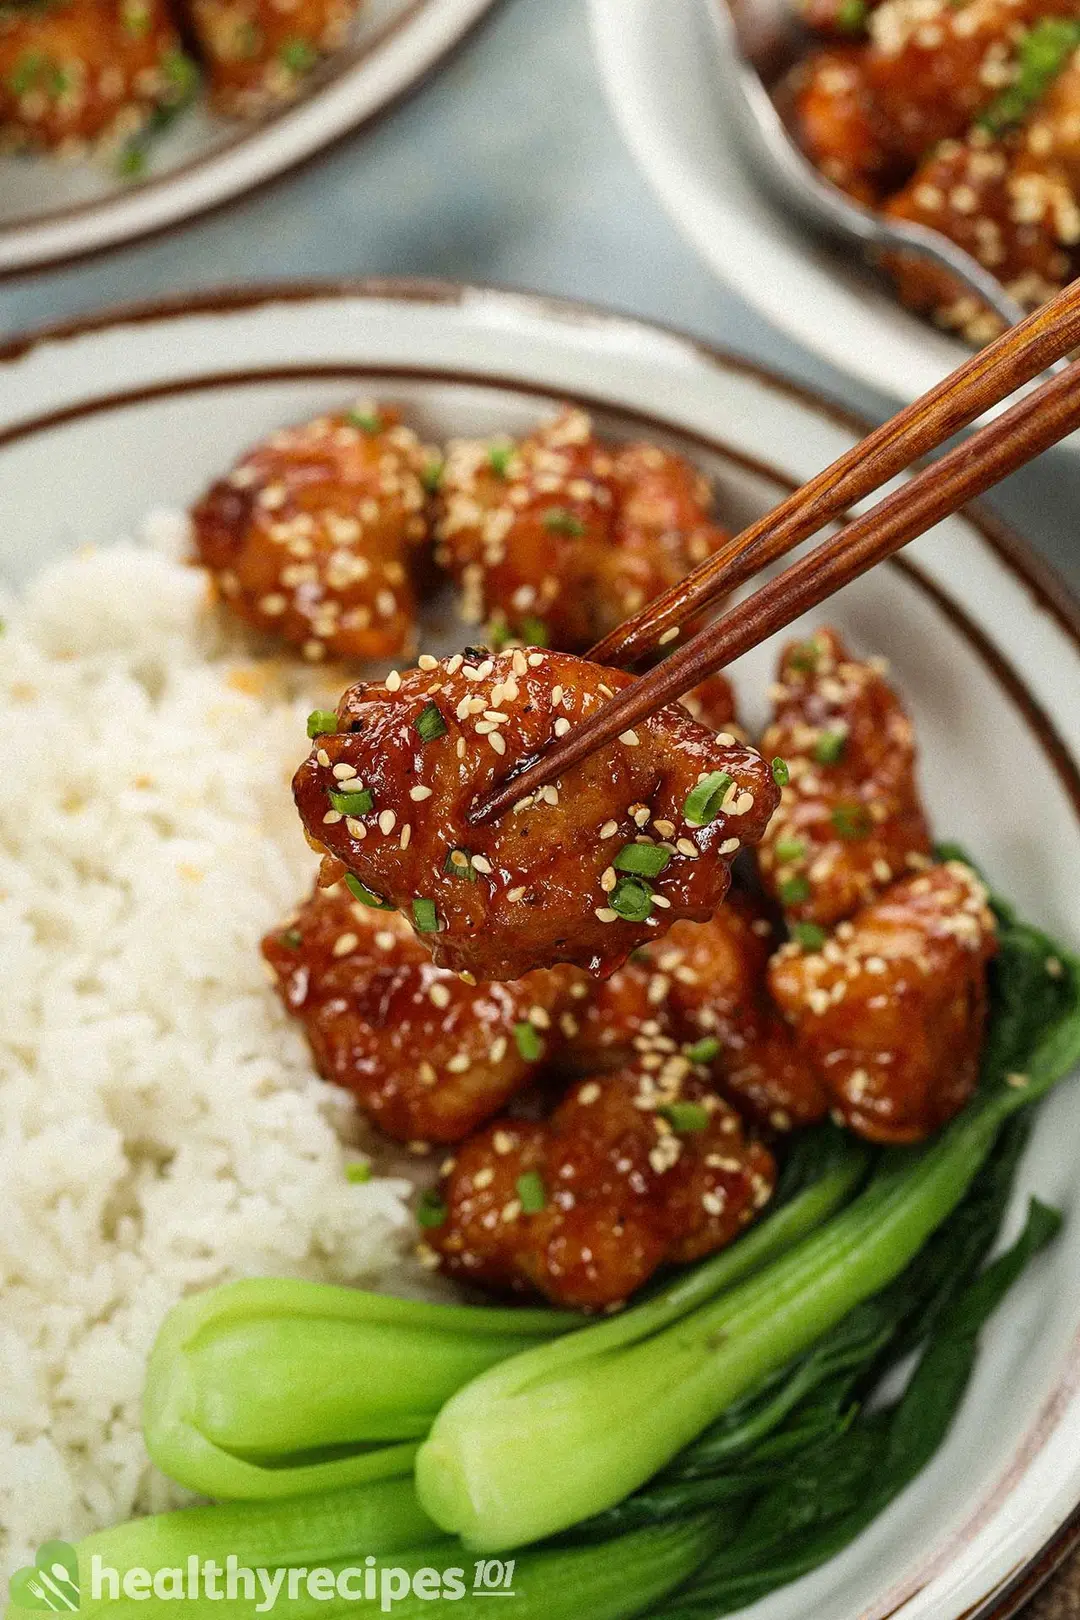 A pair of chopsticks holding up a piece of deep-fried chicken covered in honey sauce and white roasted sesame seeds